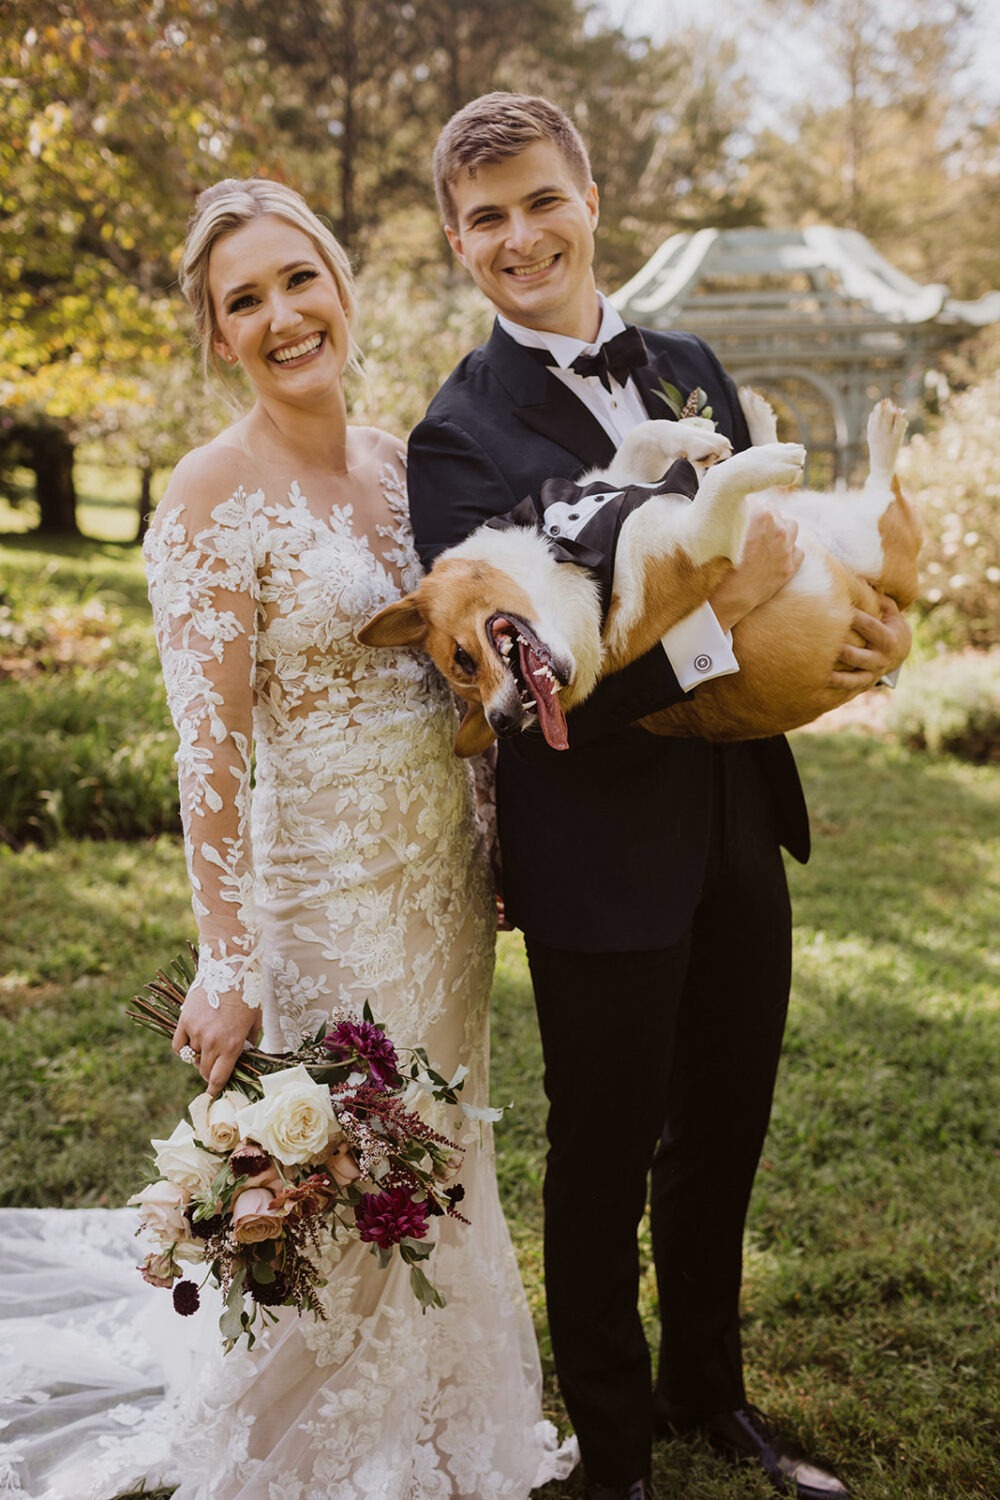 couple holds dog together at outdoor wedding 